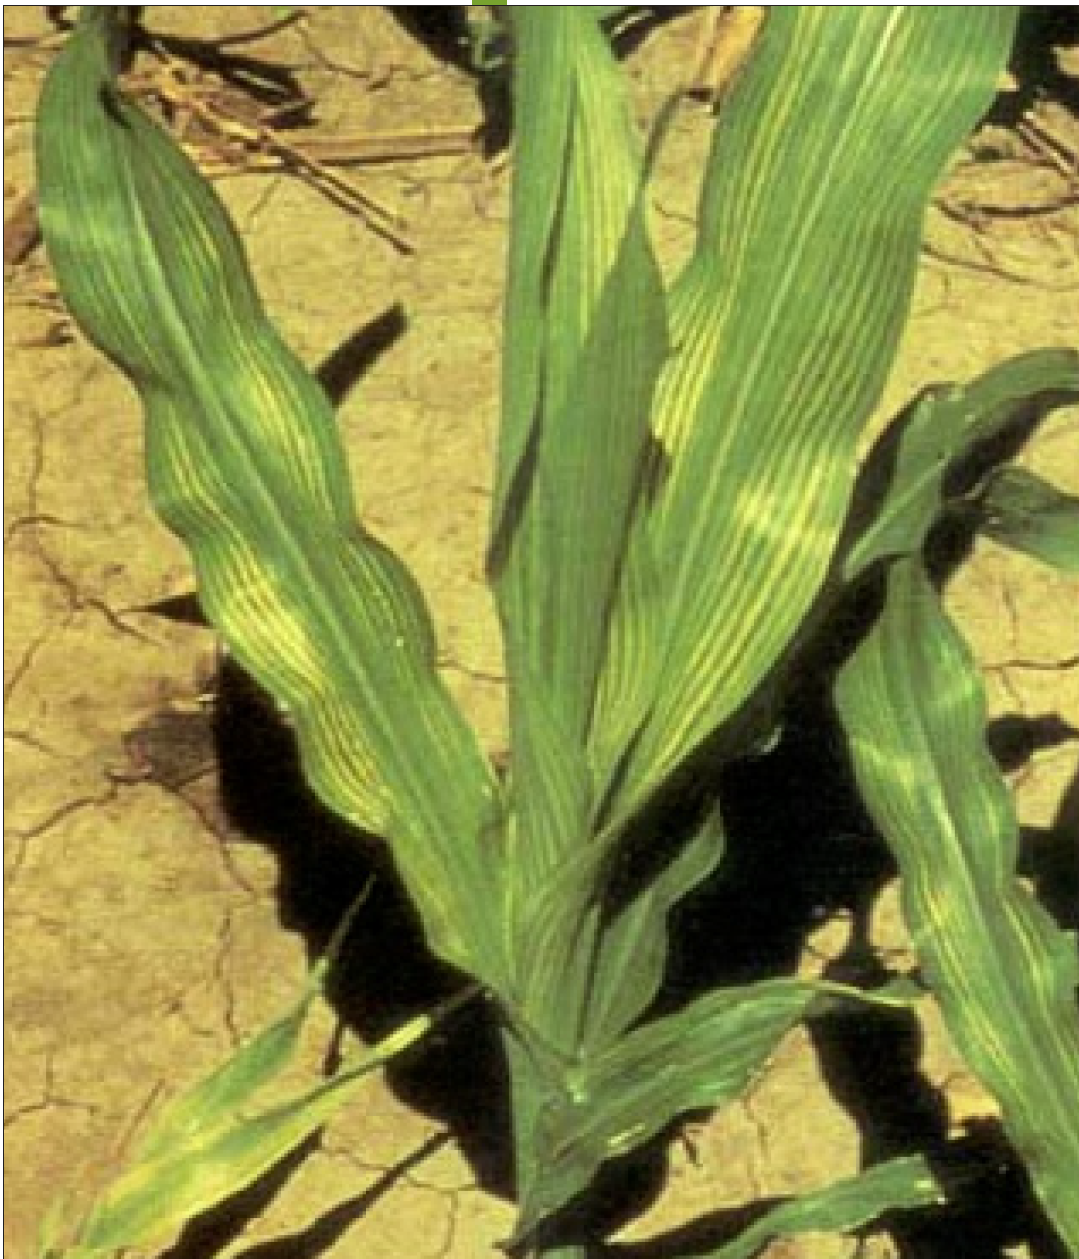 A corn plant out in the field displaying yellow stripes on its leaves, indicative of an iron deficiency in this case